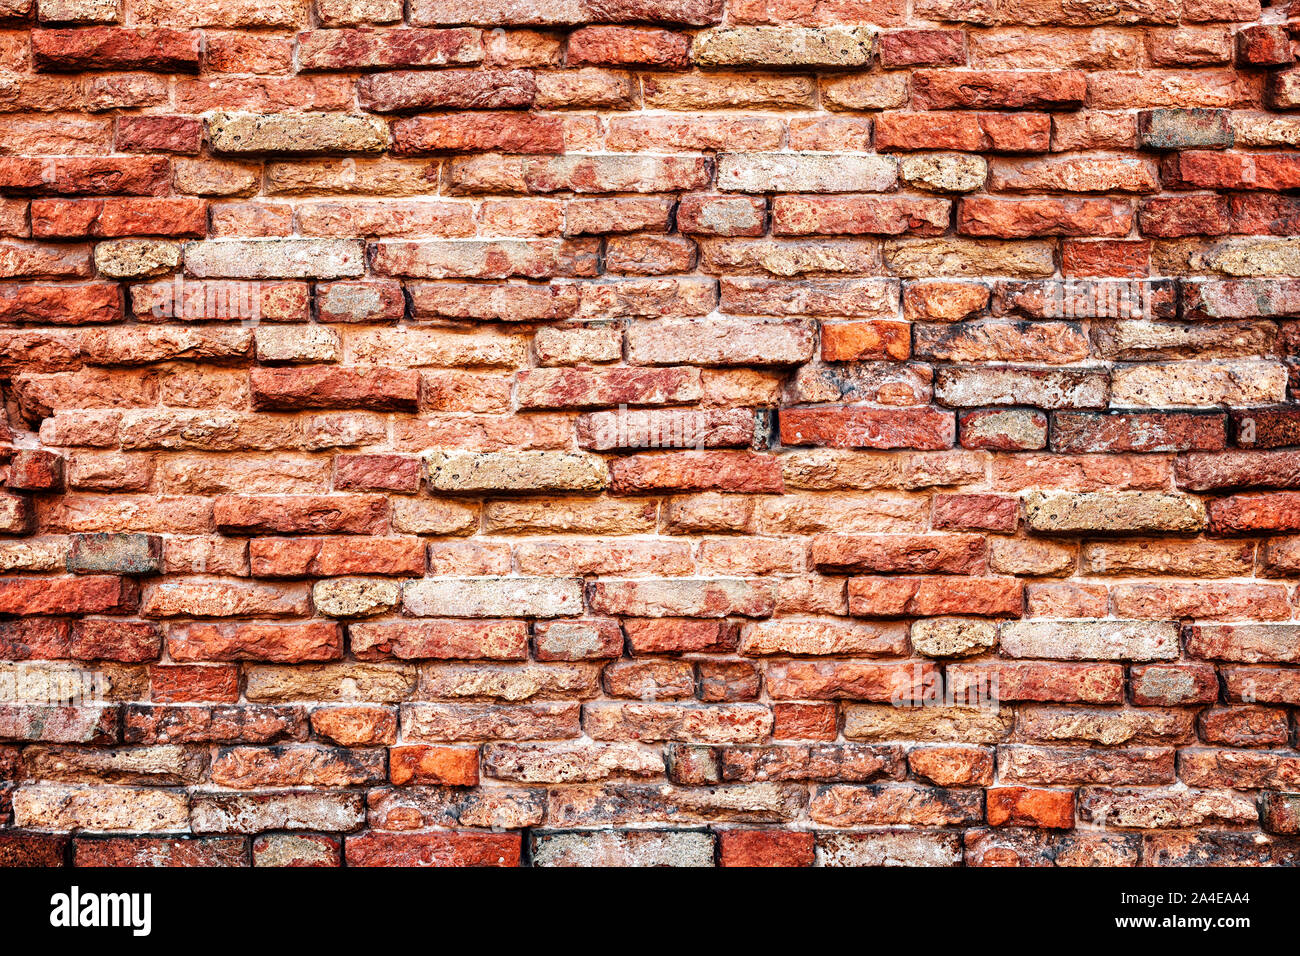 Old orange brick wall background with aging and rustic texture Stock Photo